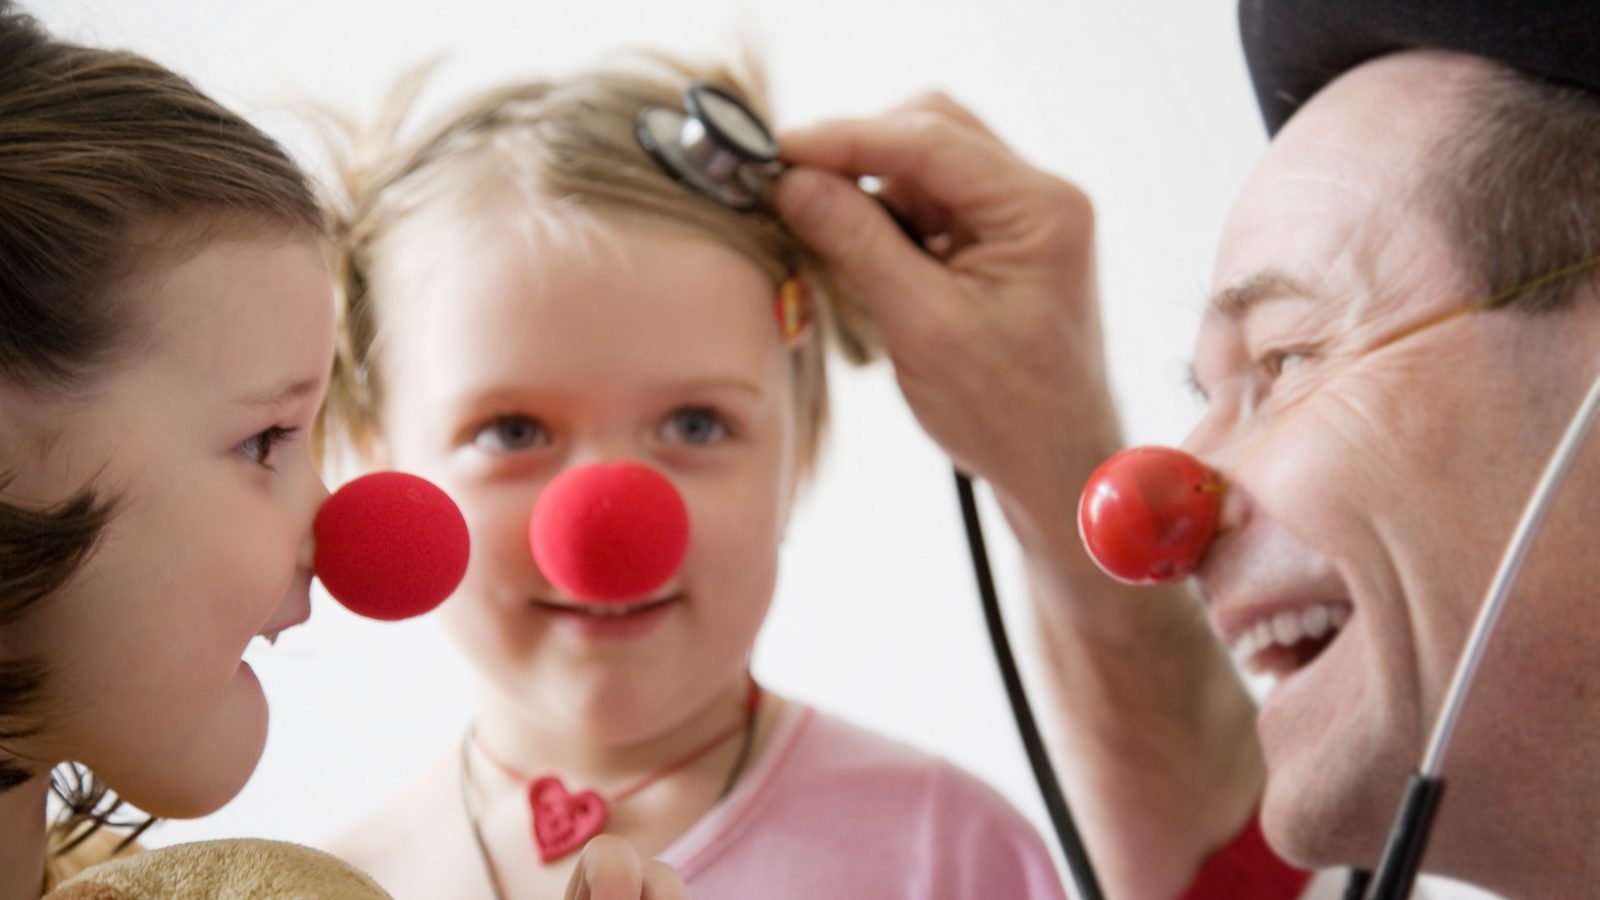 USC Medical Clown Program Healing With Smiles